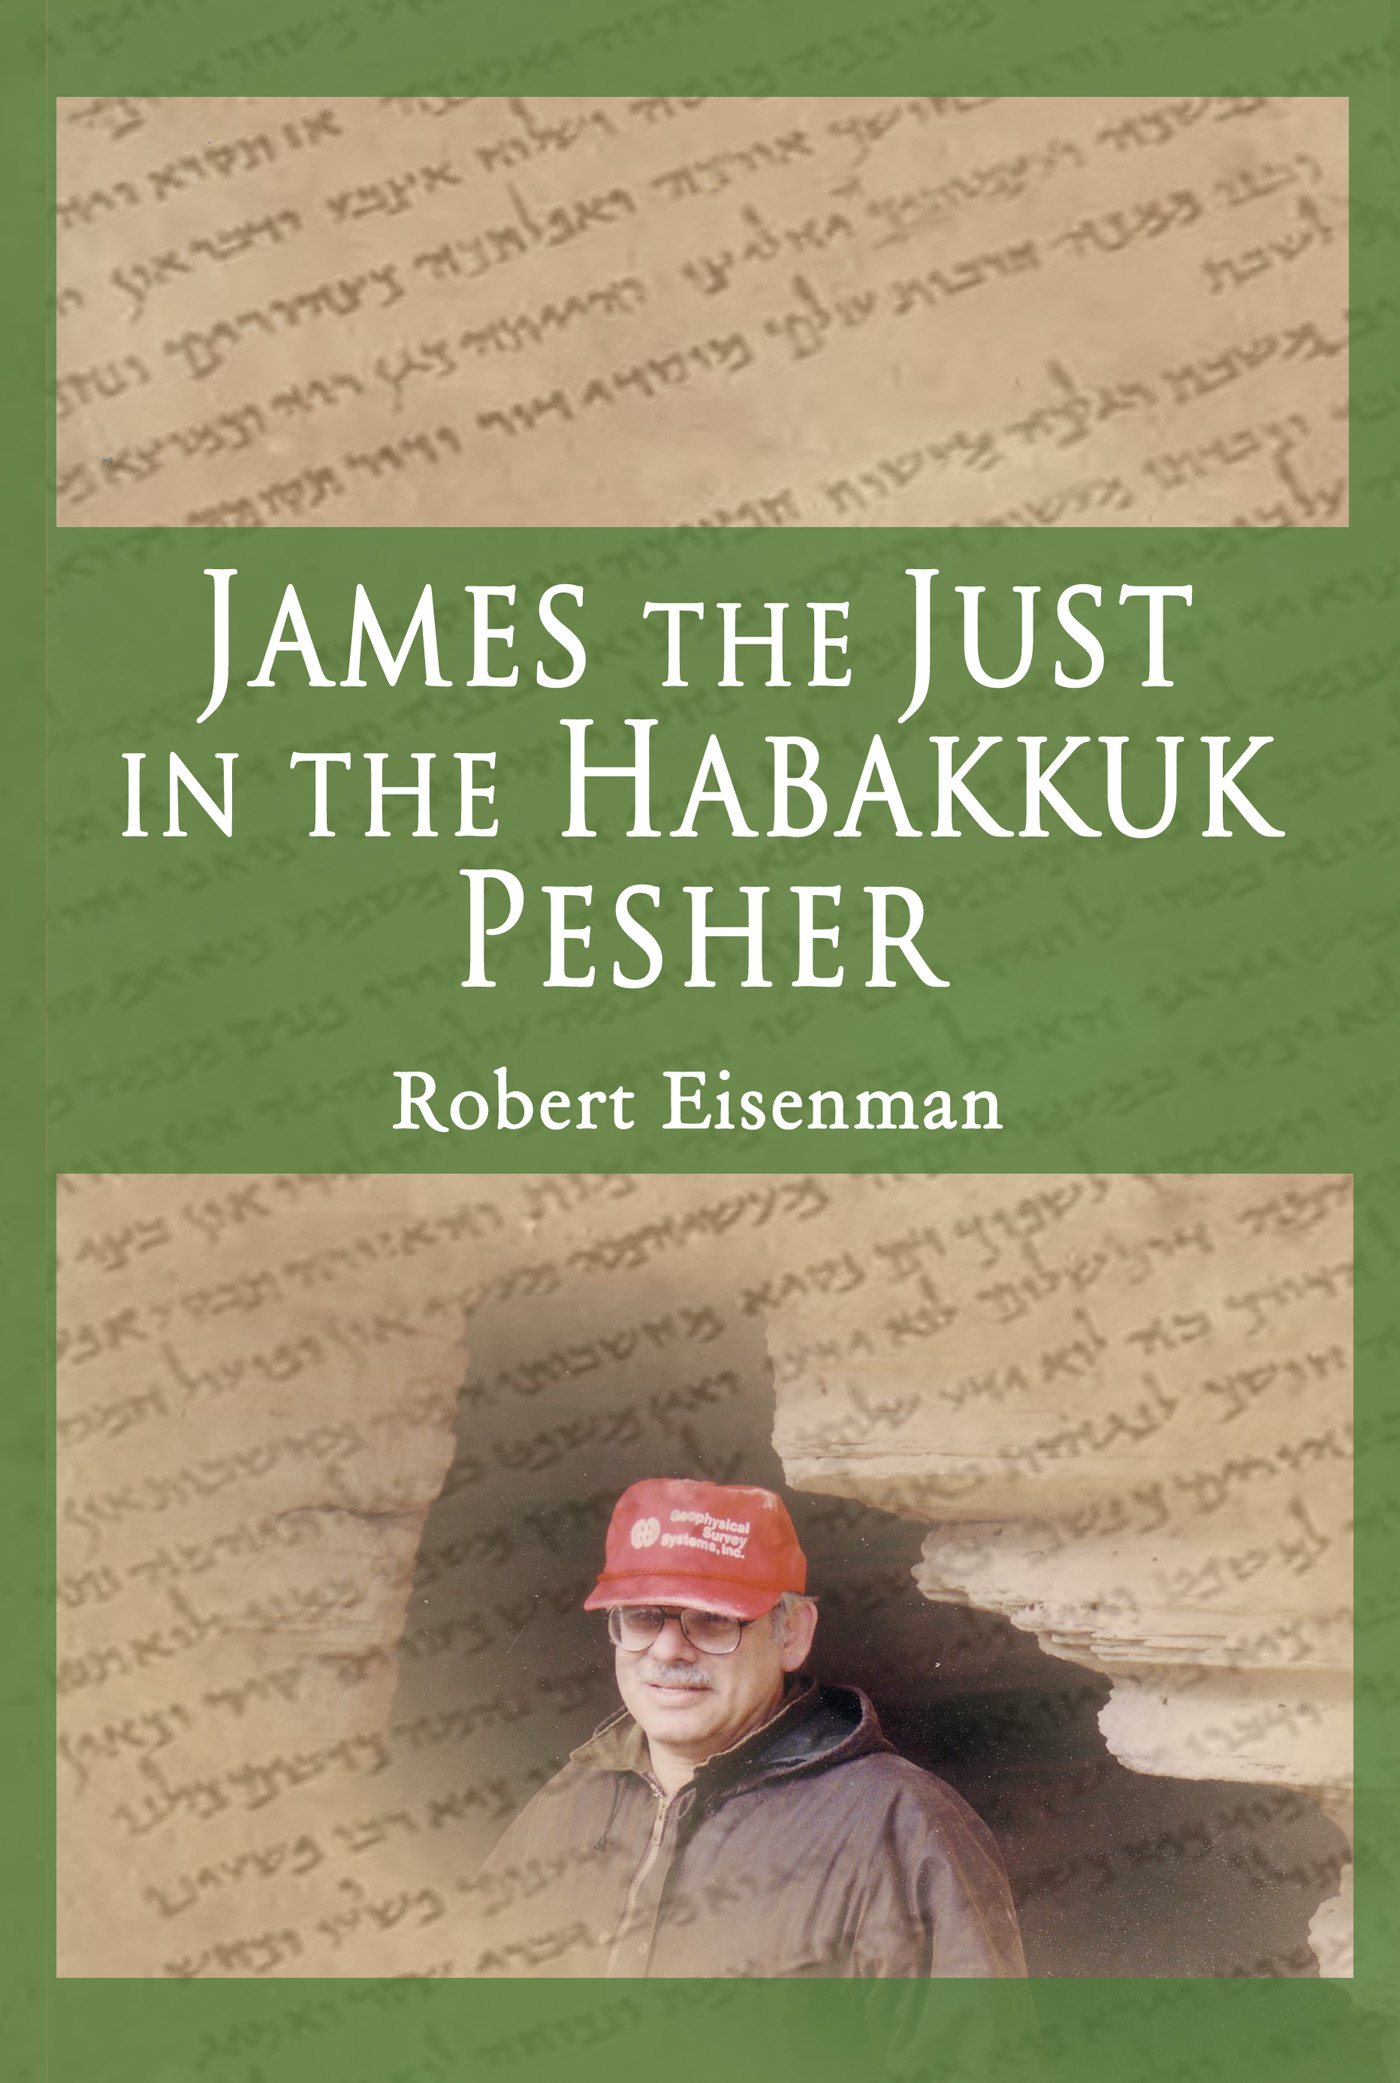 James the Just in the Habakkuk Pesher